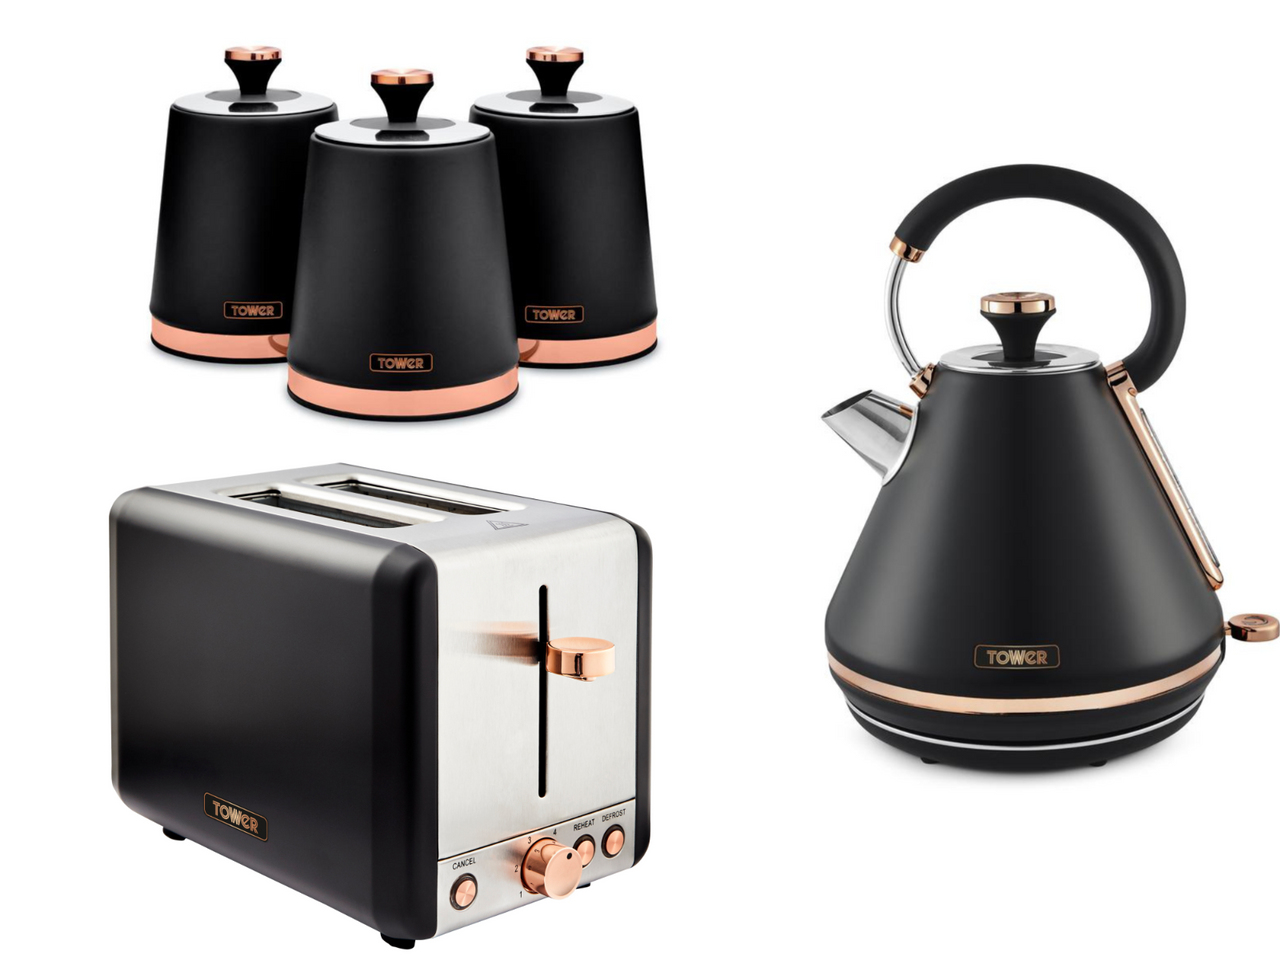 Tower Cavaletto Black 1.7L 3KW Pyramid Kettle, 2 Slice Toaster & Tea, Coffee, Sugar Canisters Kitchen Set